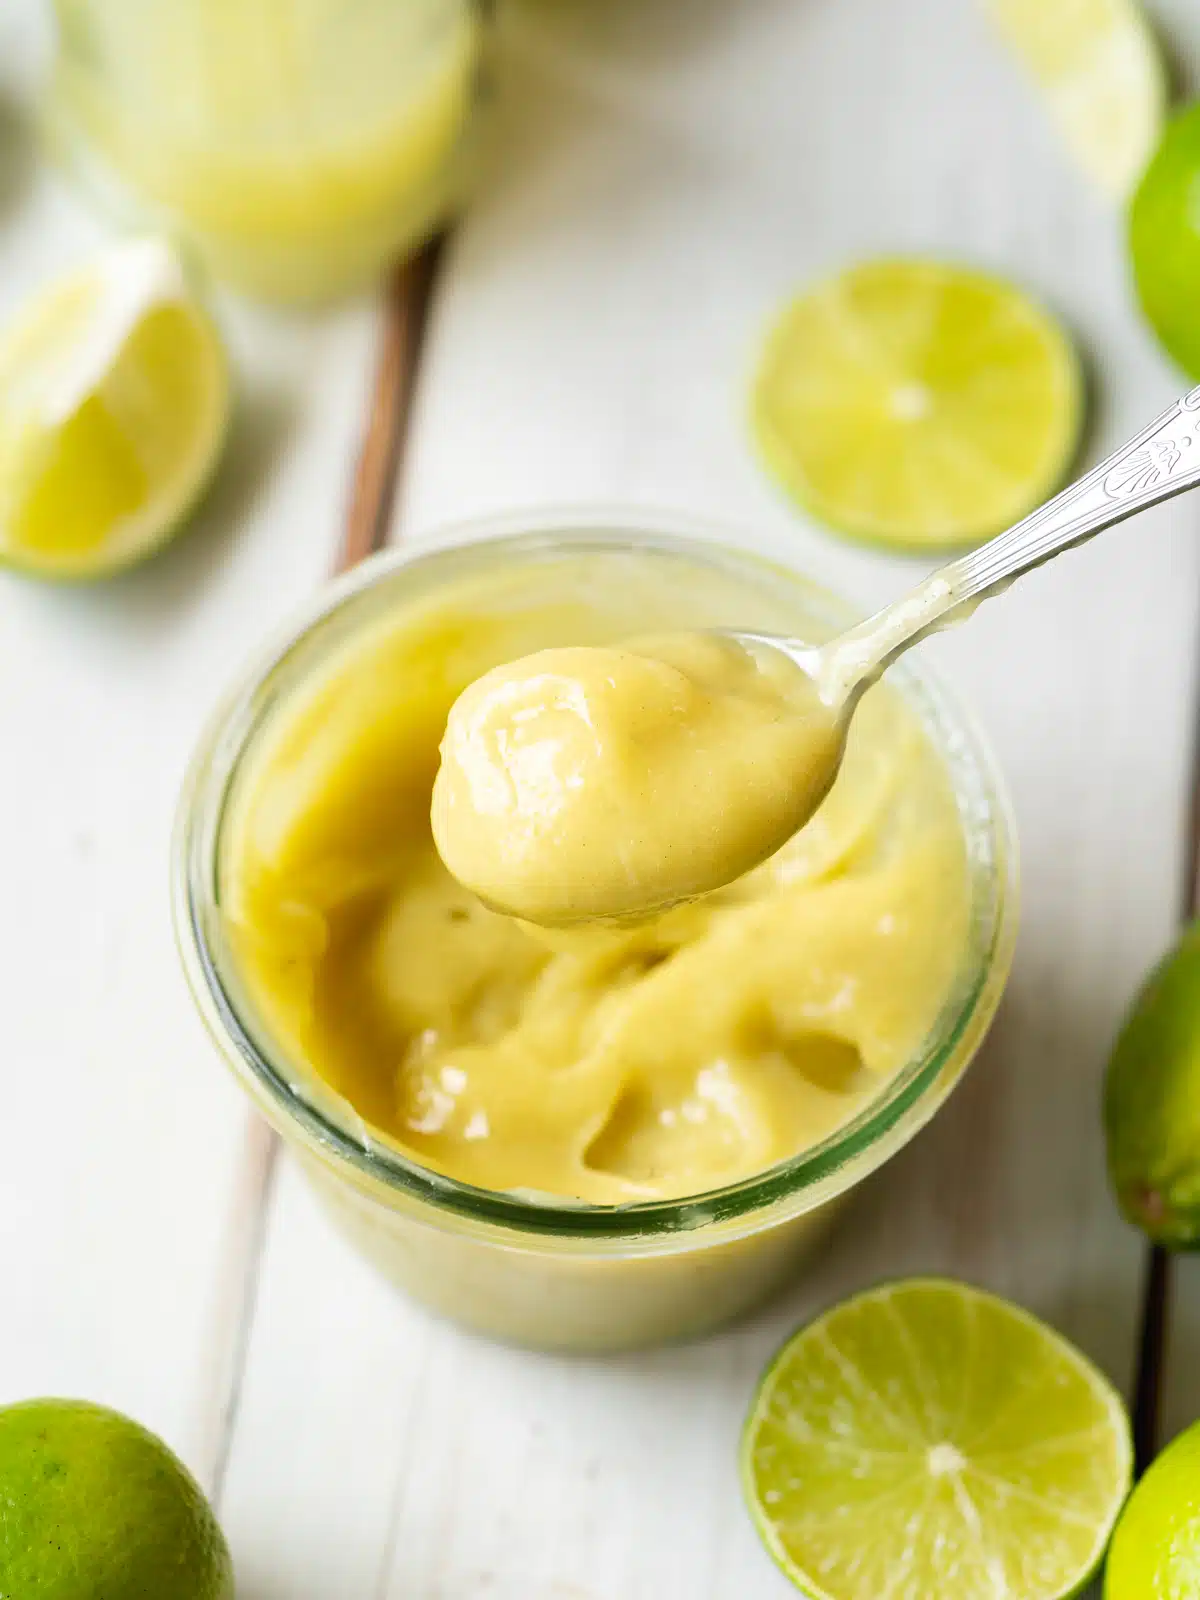 thick lime curd without eggs being spooned out of a jar. It has a vibrant green color and there are fresh lime slices scattered around it.